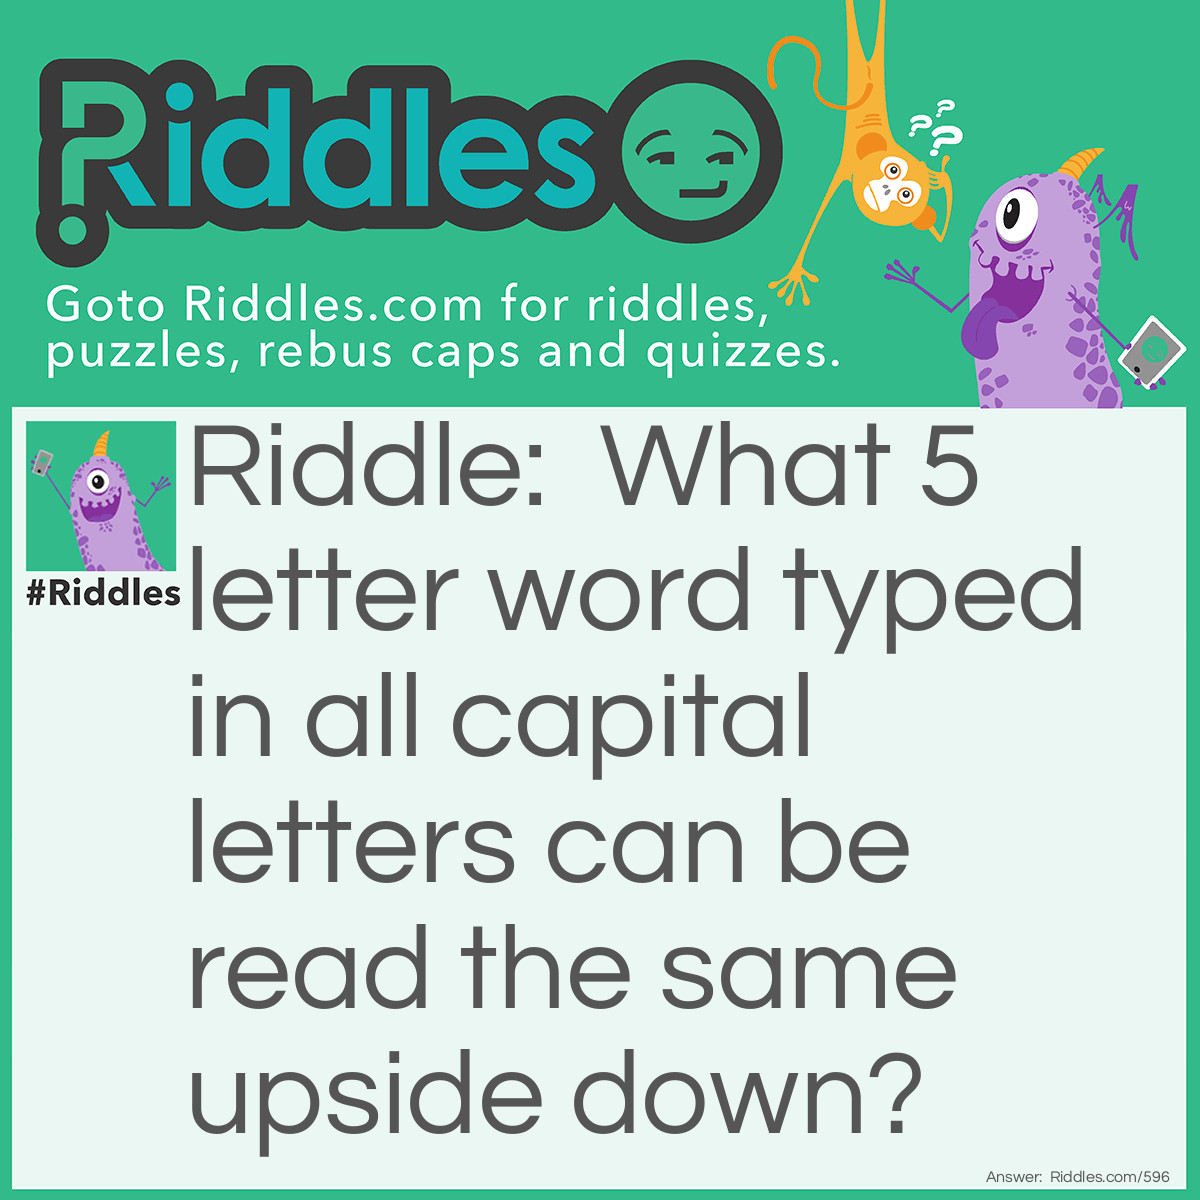 Riddle: What 5 letter word typed in all capital letters can be read the same upside down? Answer: SWIMS.